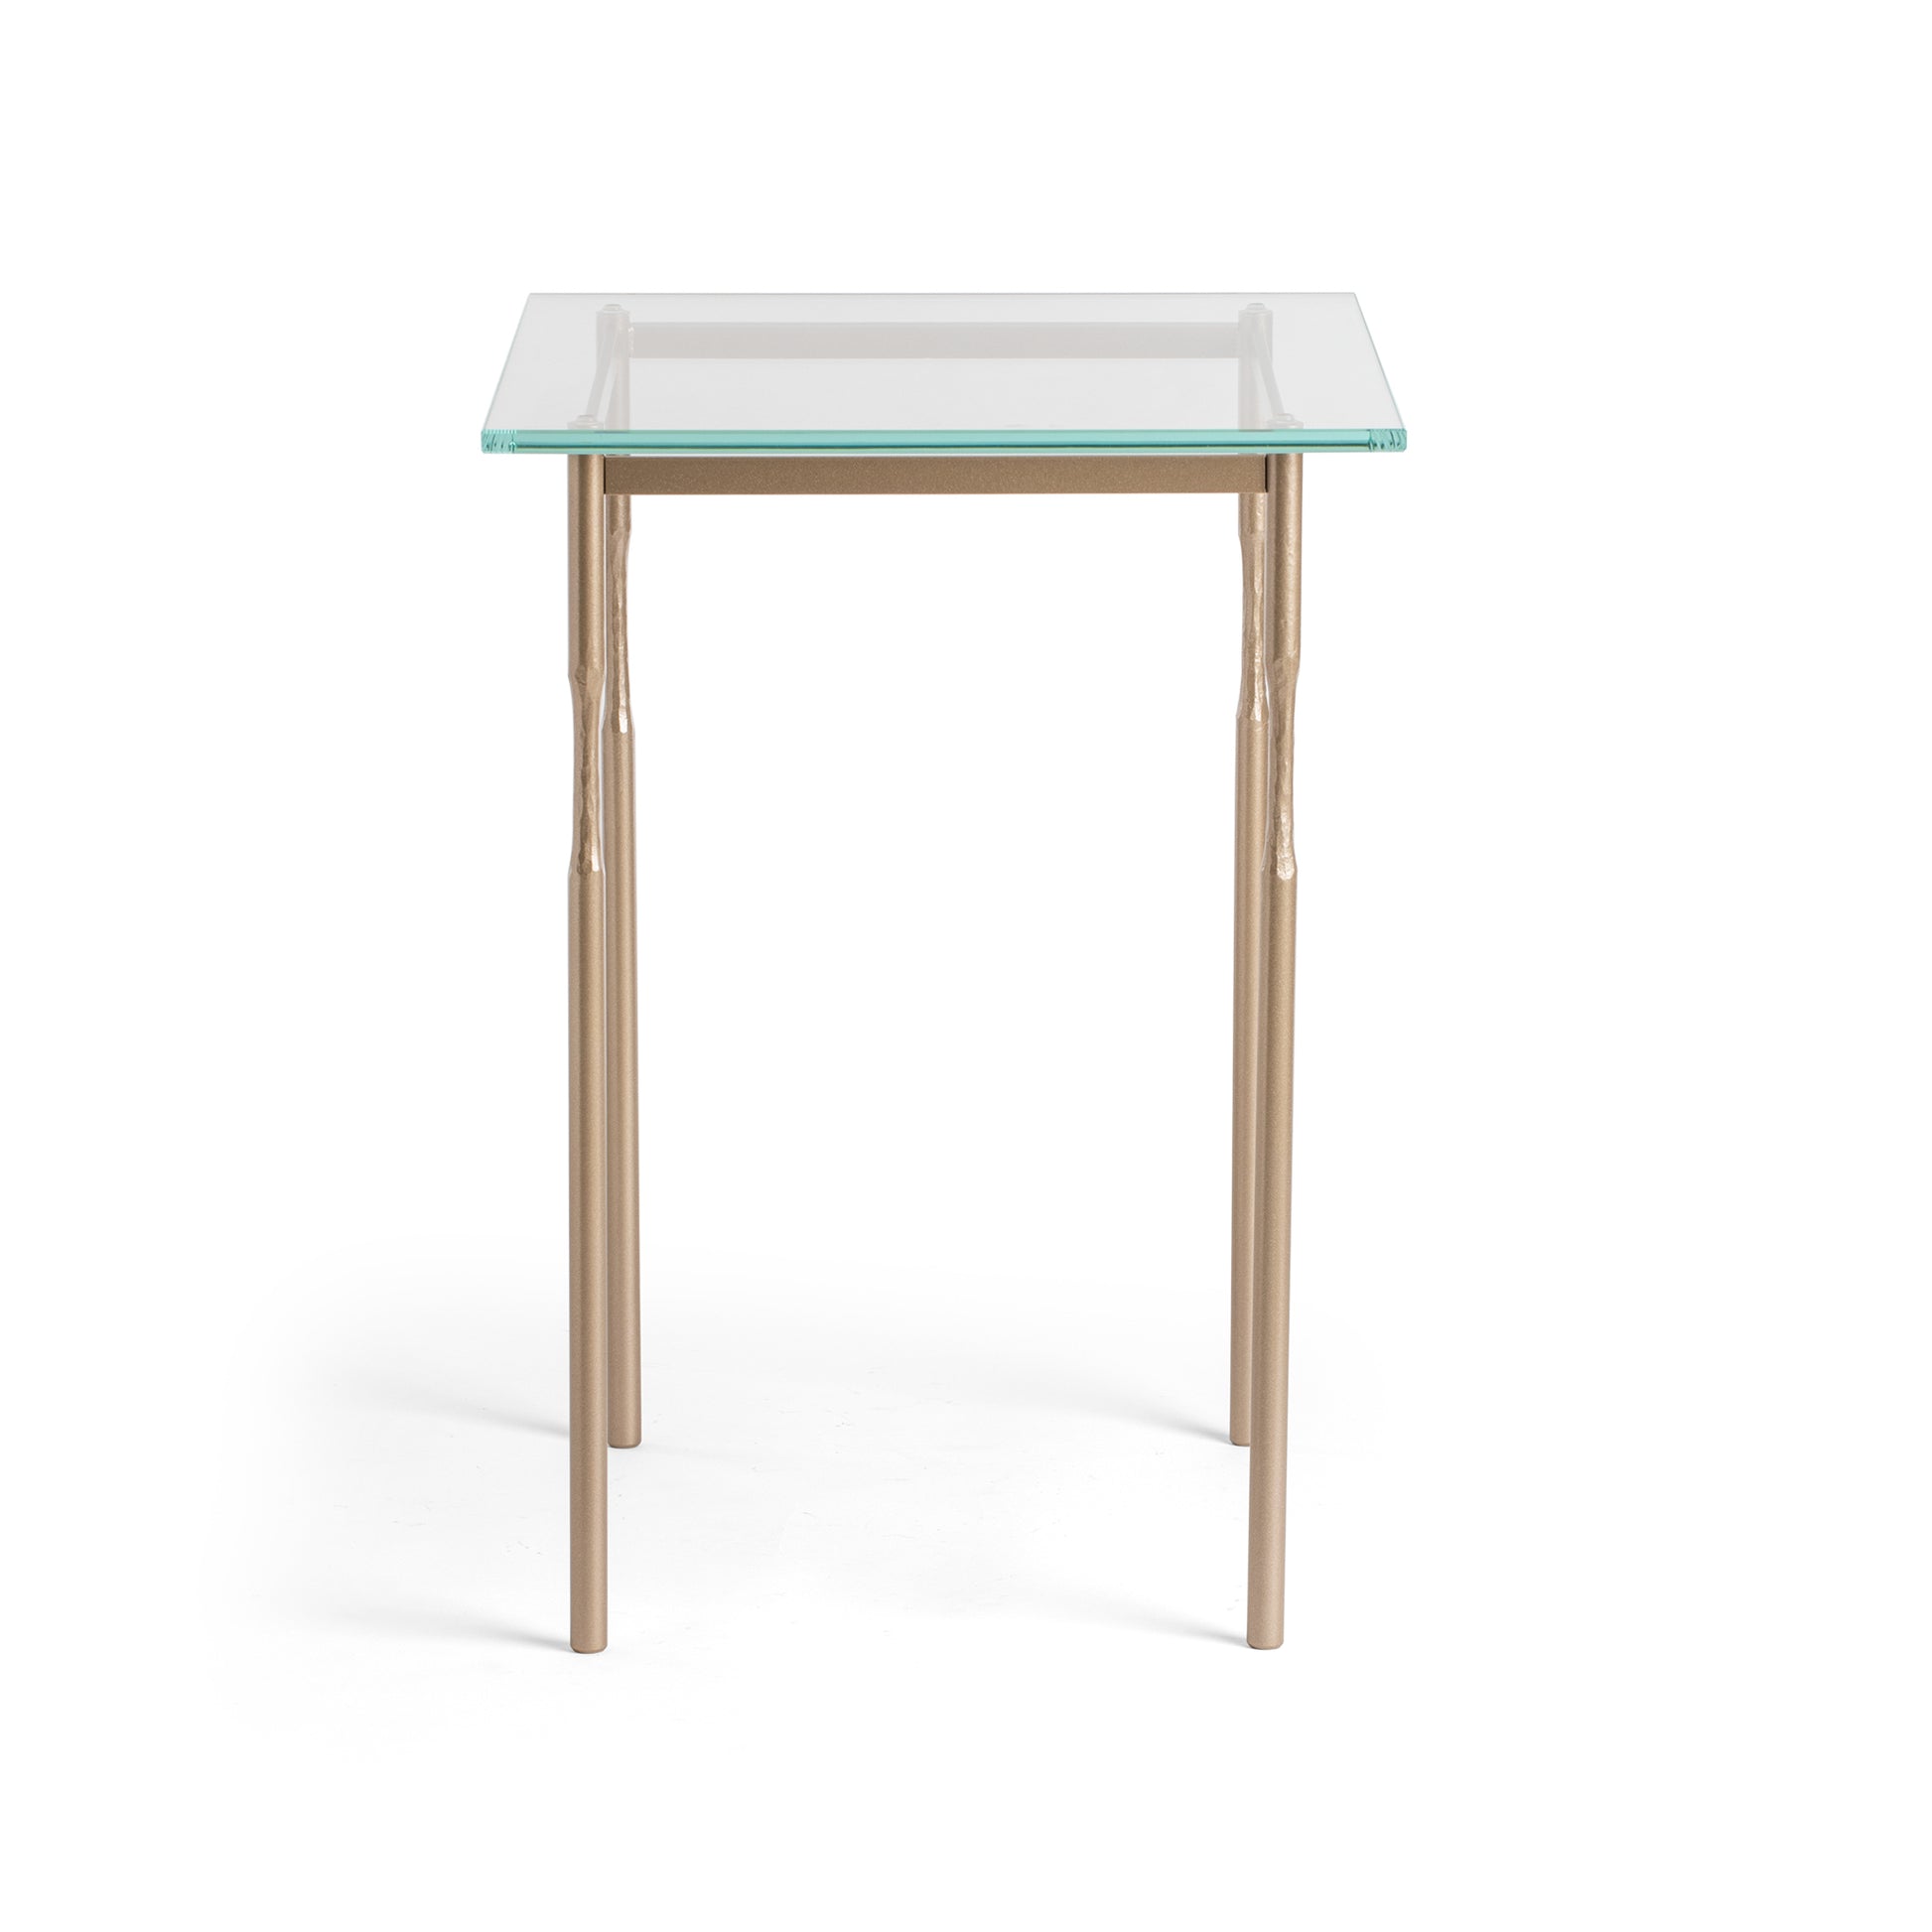 The Hubbardton Forge Senza Side Table is a modern home furniture piece featuring a glass top and elegant metal legs. It offers a sleek and contemporary look, making it perfect for any fine-tailored living.